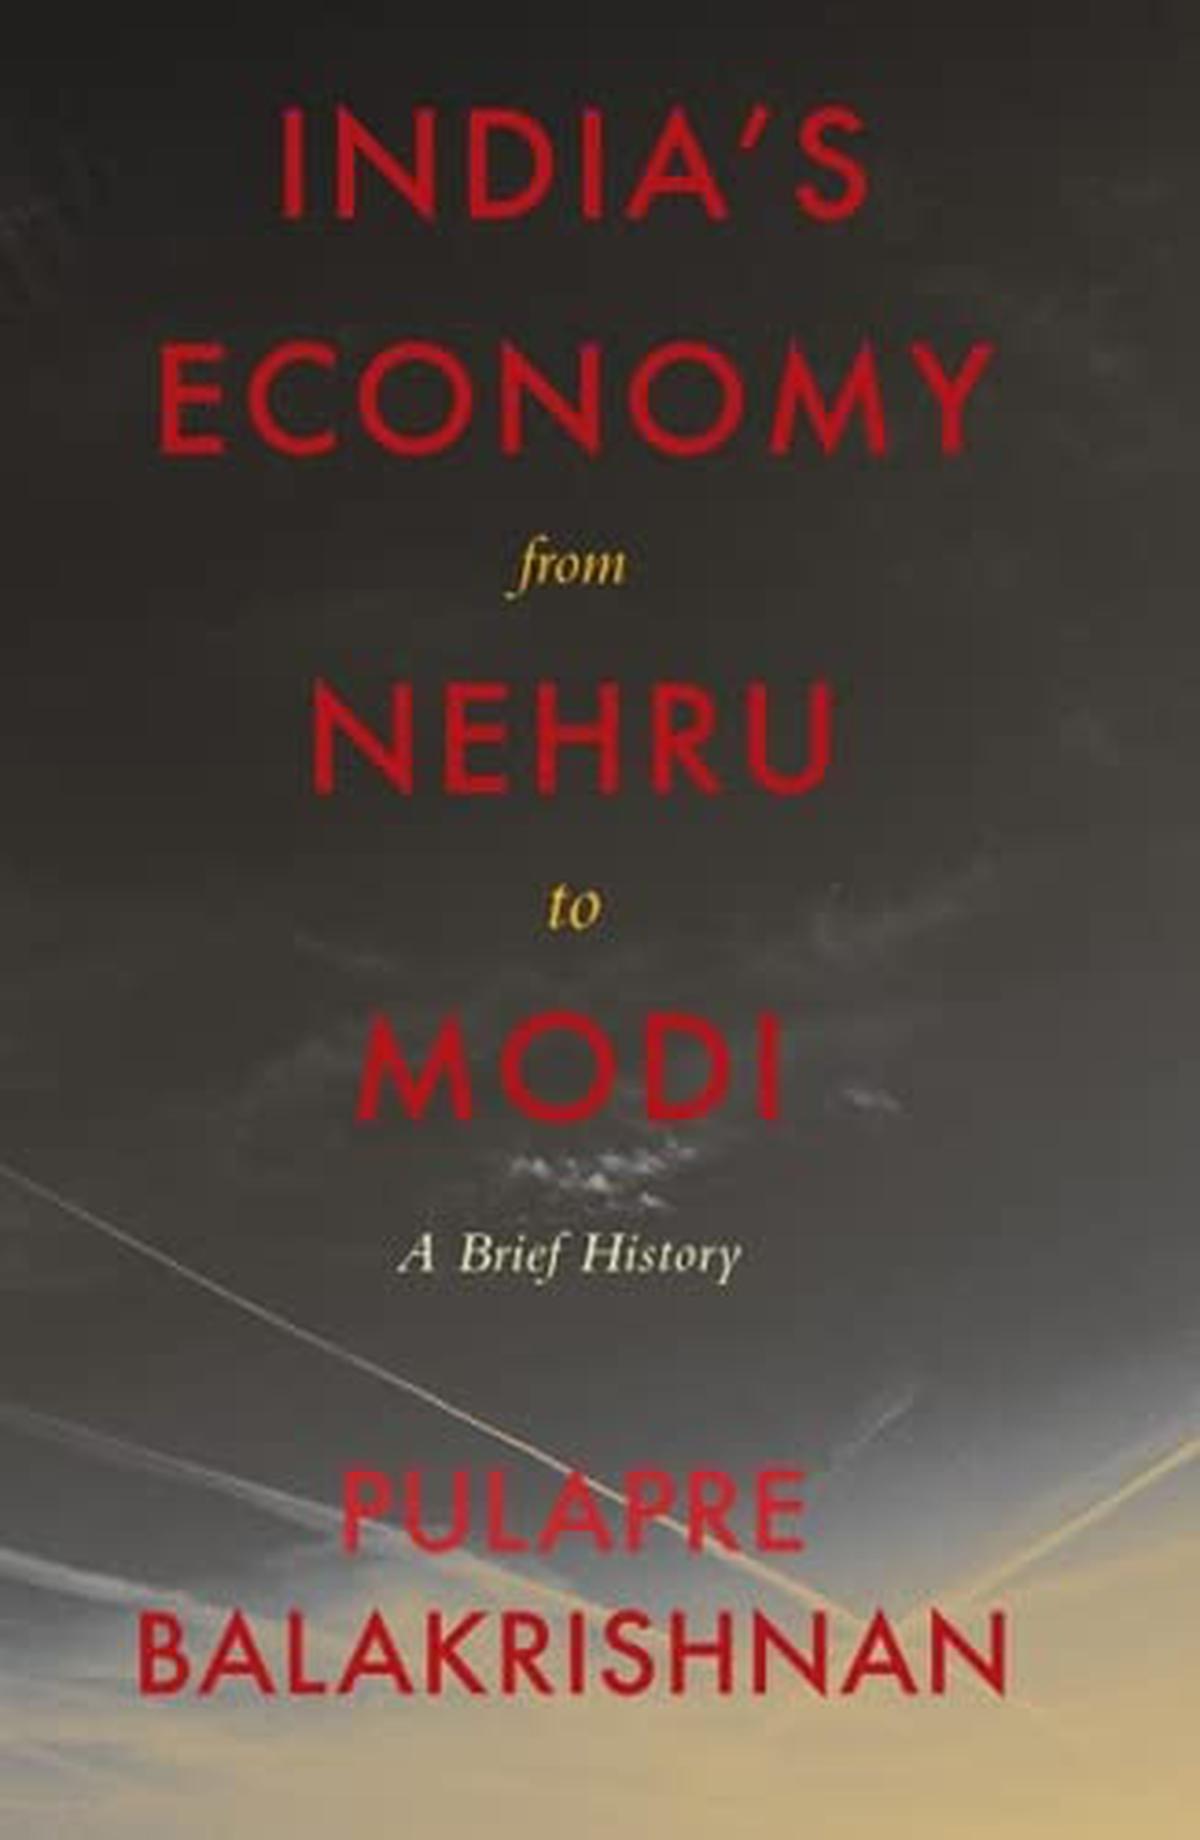 Review of India’s Economy from Nehru to Modi — A Brief History: Good policy, bad policy